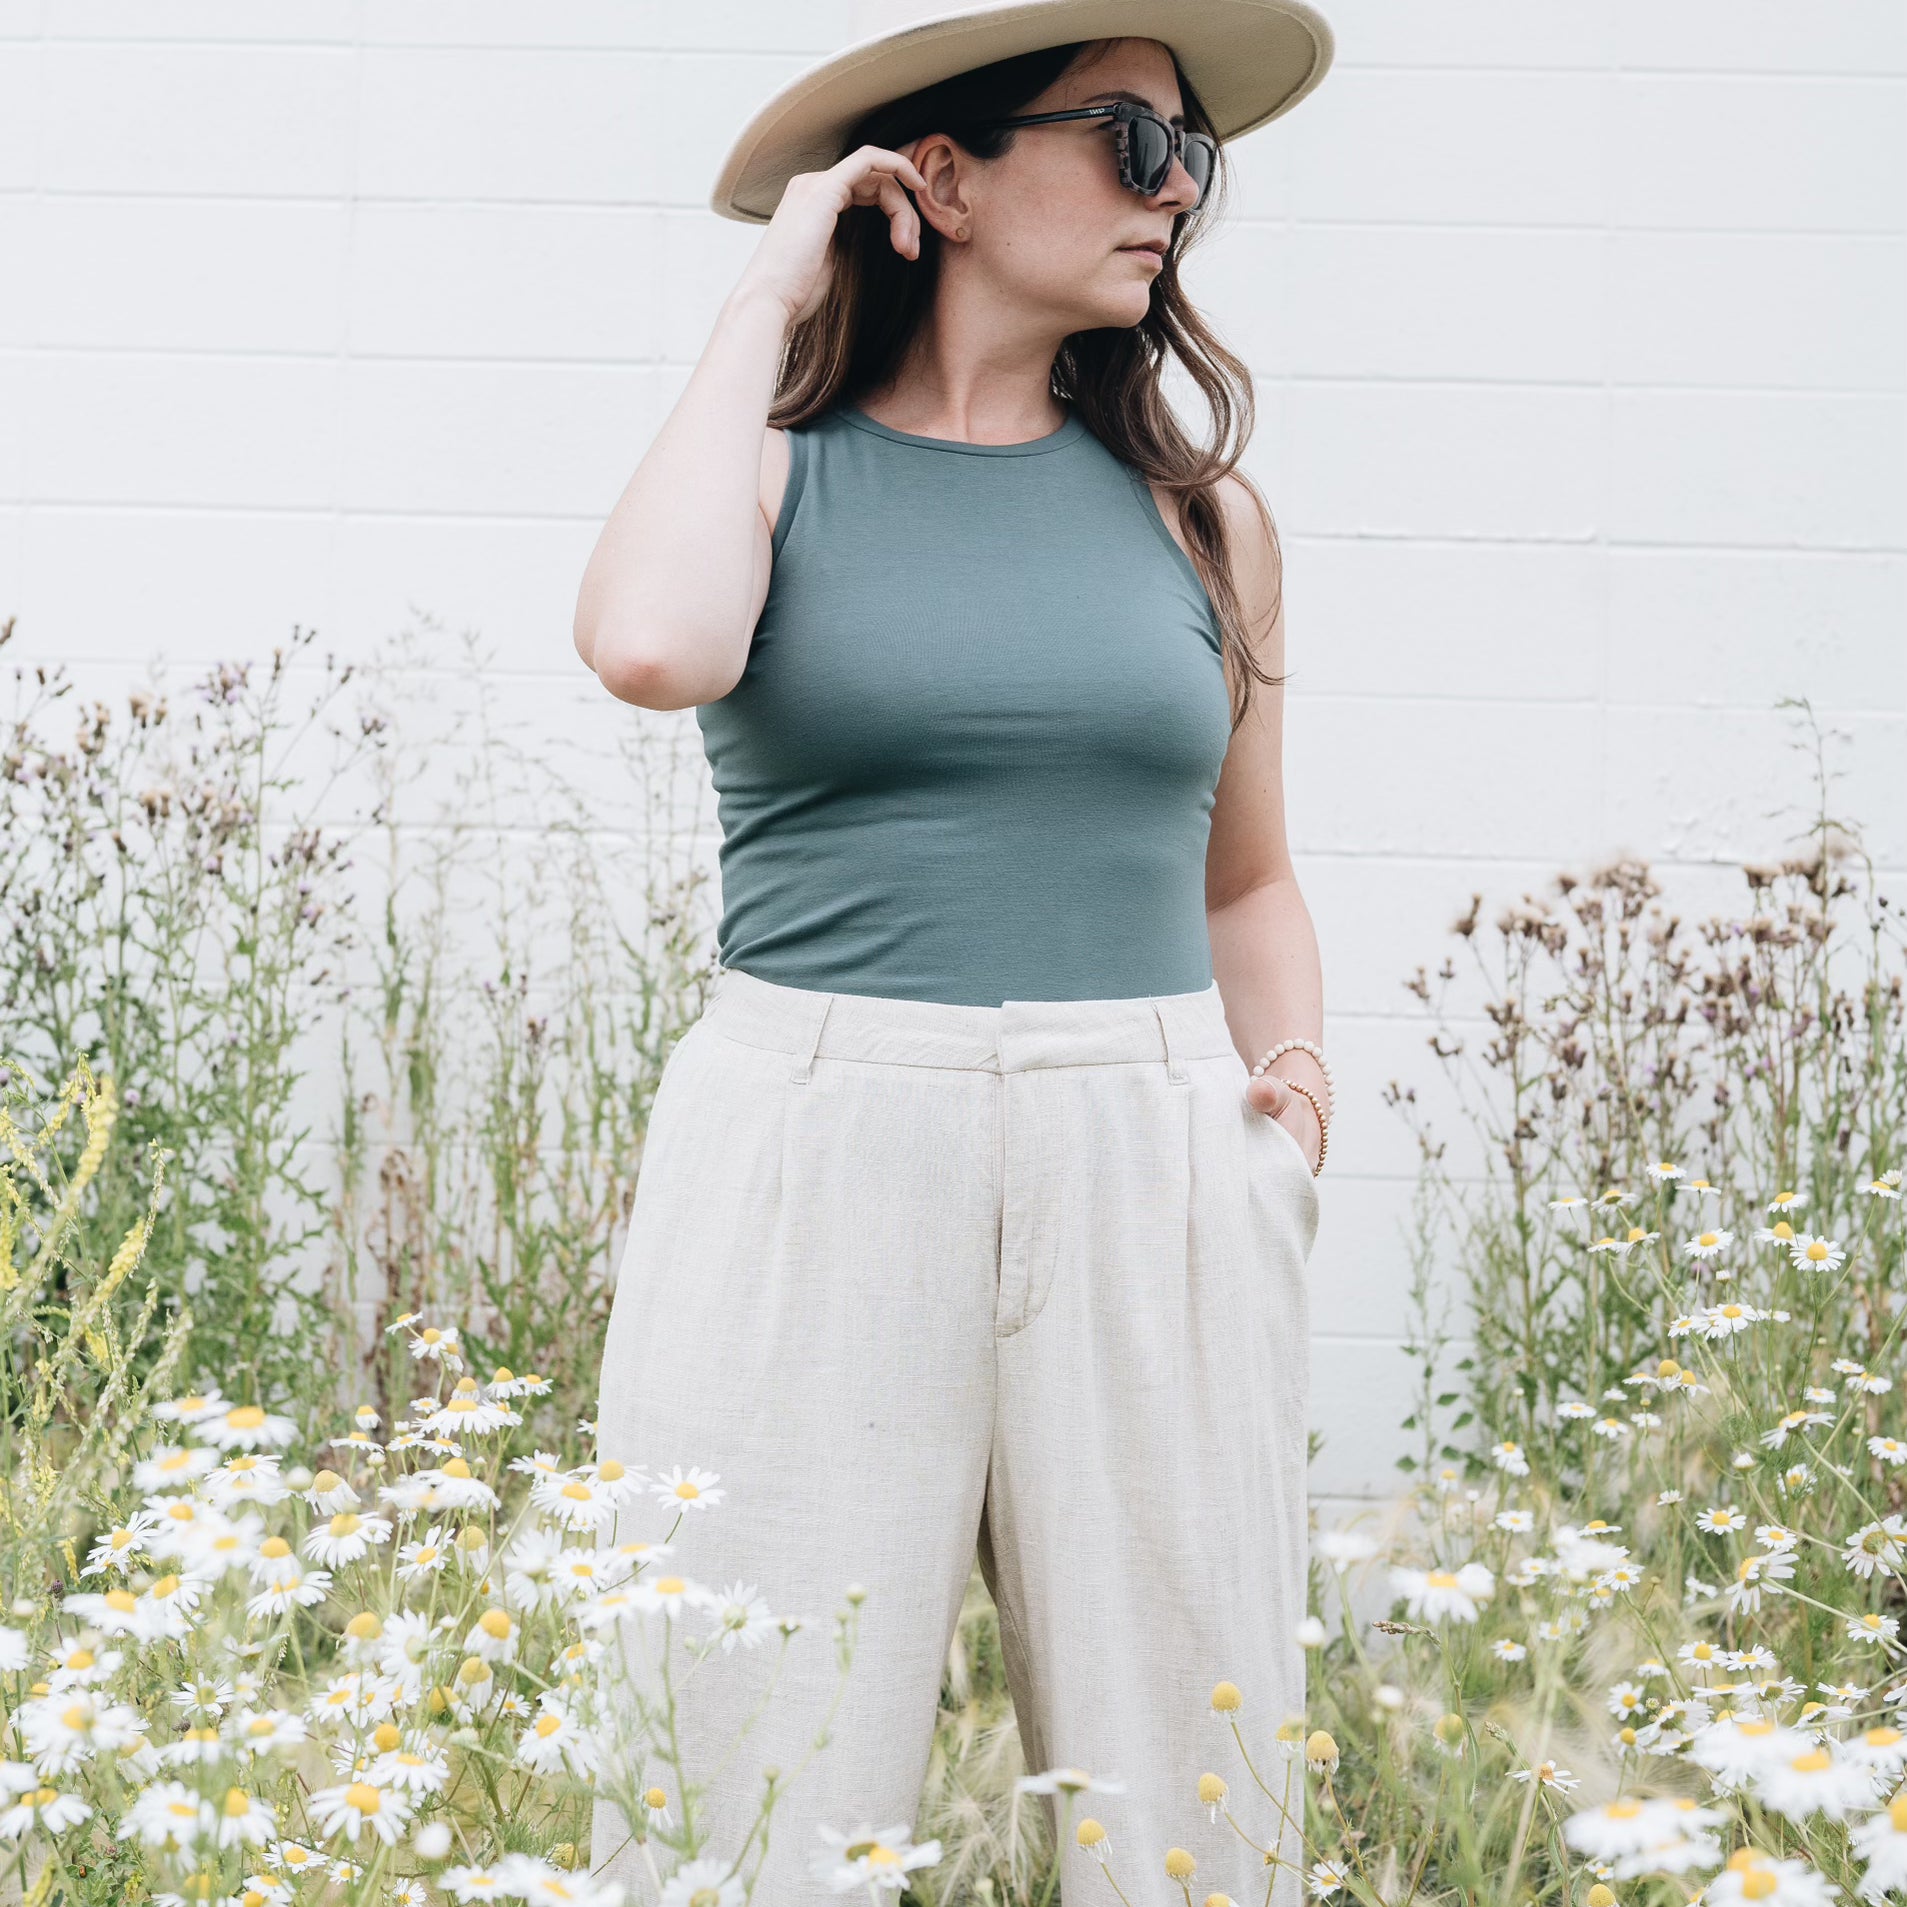 Teal high neck tank top with hat and subglasses and wide leg pants